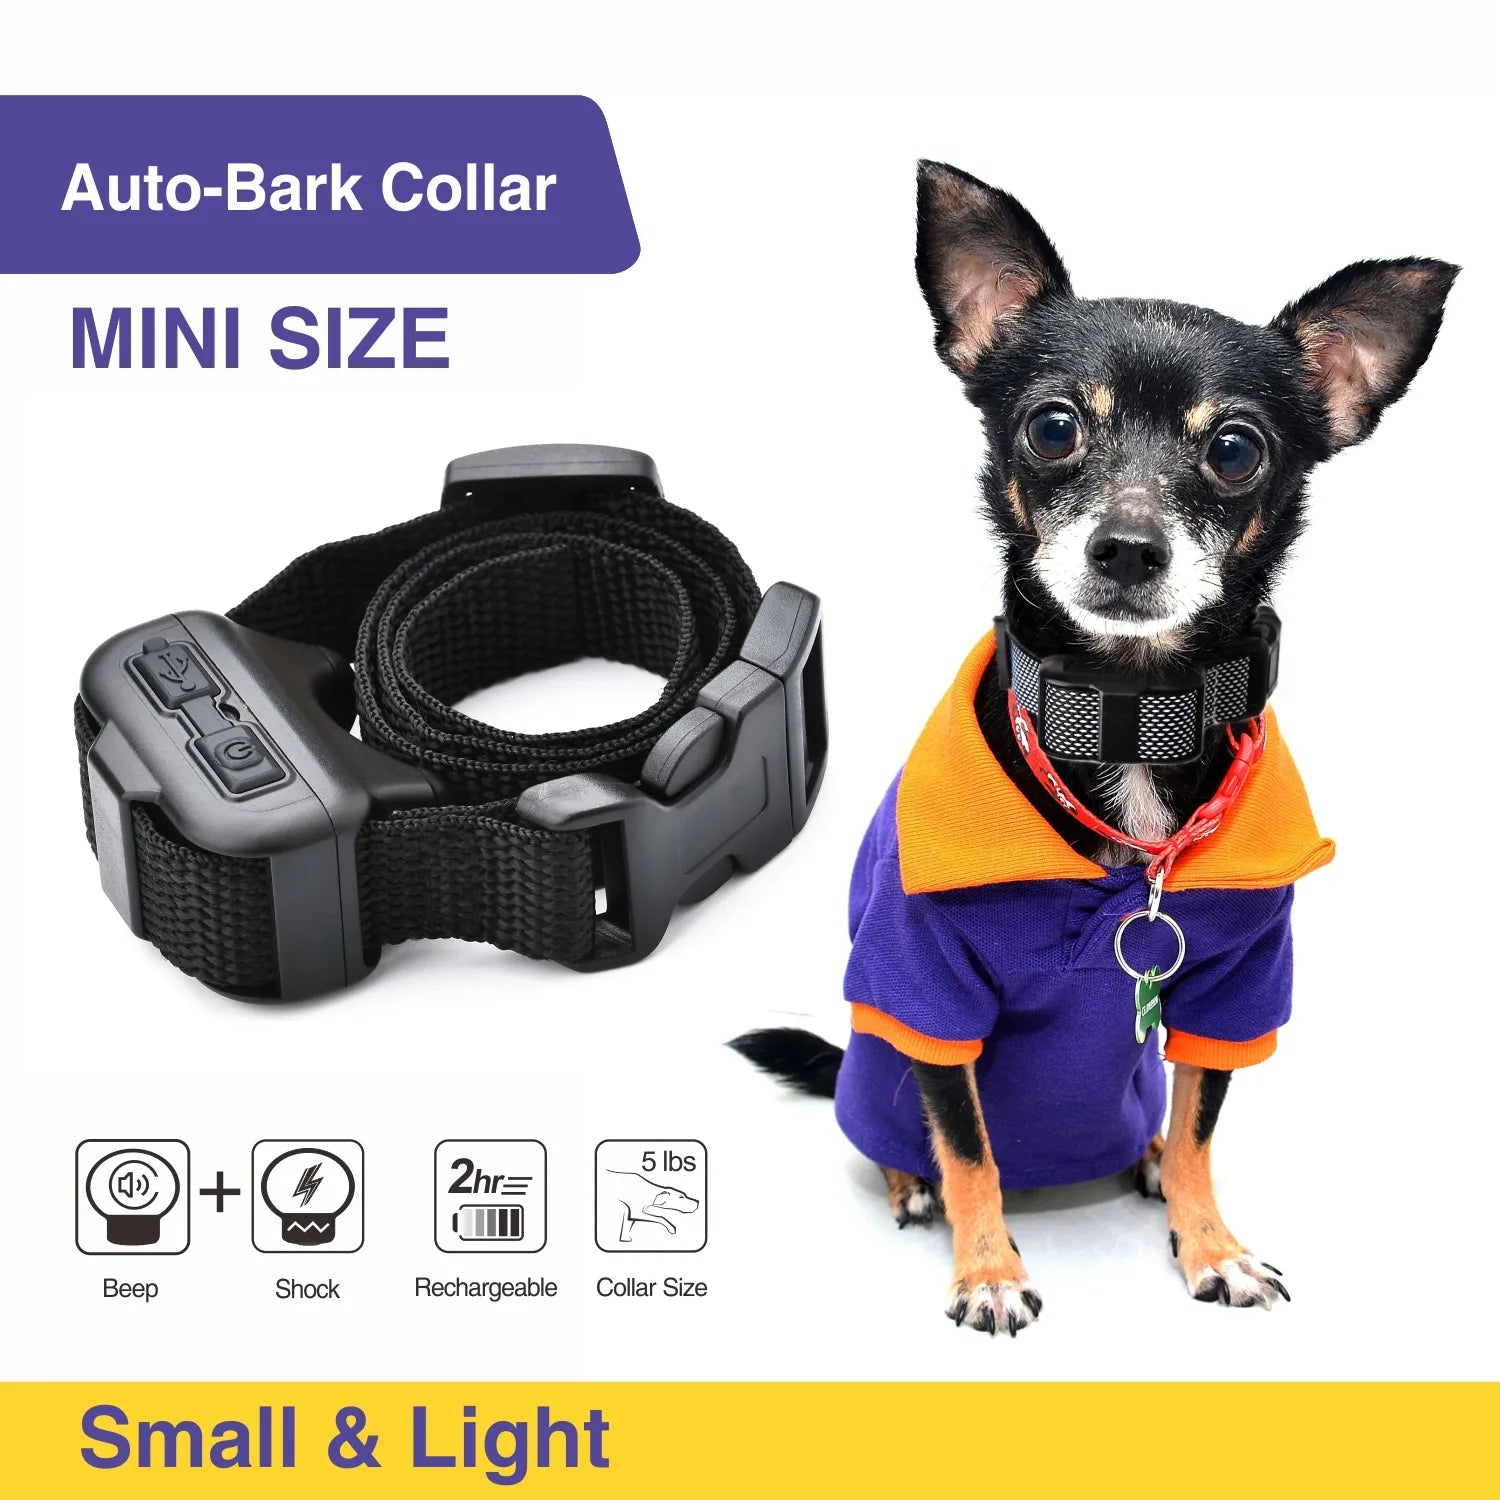 Small Dog Auto Bark Collar Rechargeable Dog Training Electric Collar Anti No Bark Control For Puppy Dog with Shock Mode  petlums.com   